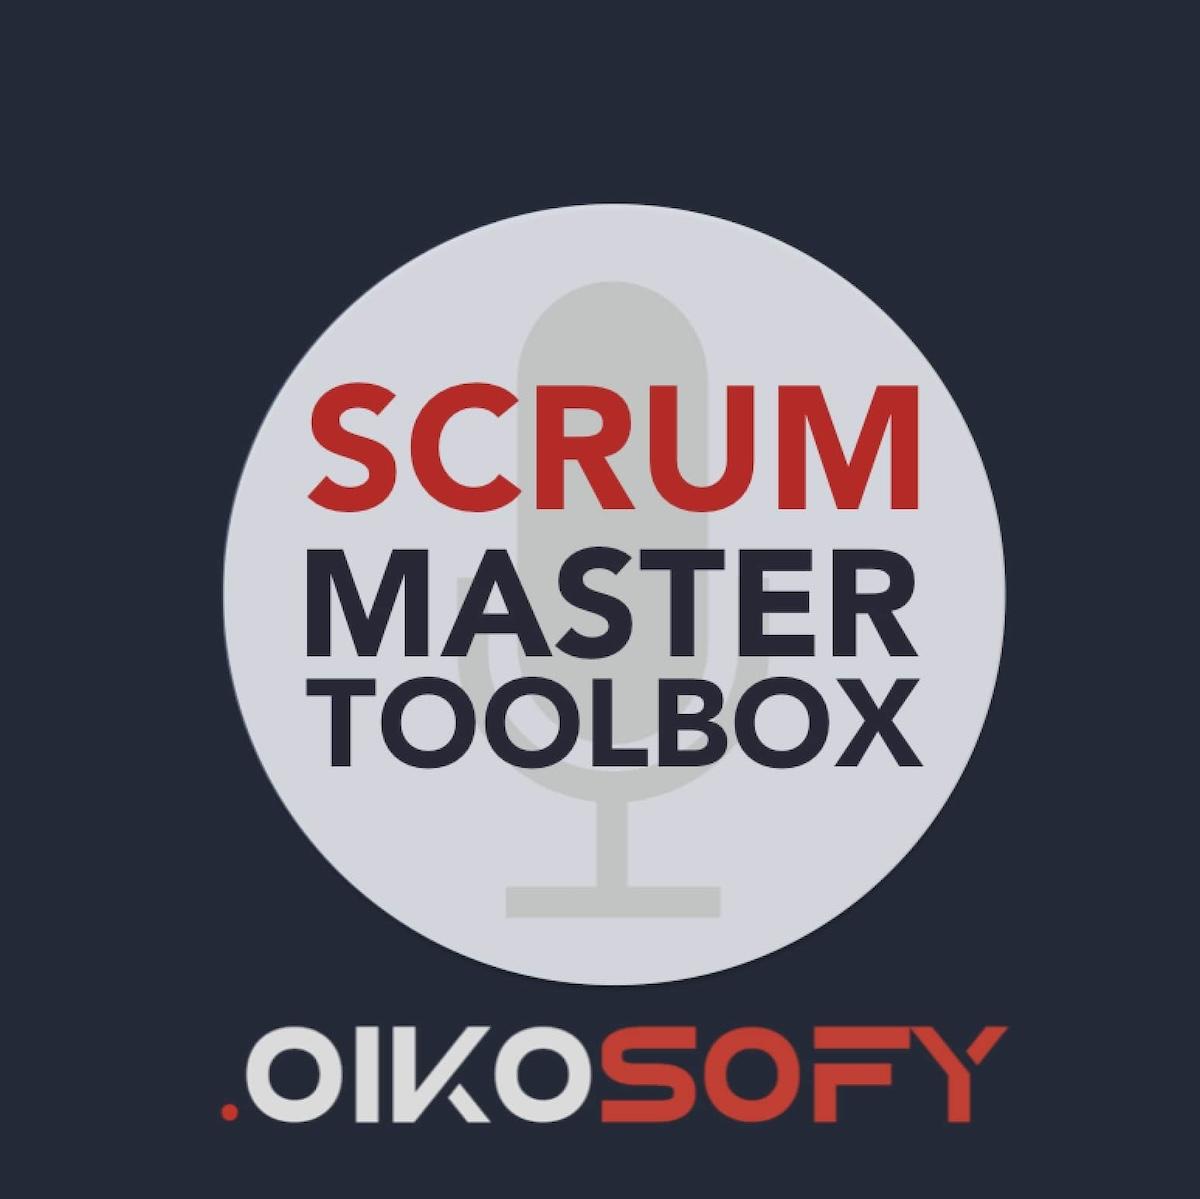 Product management podcasts: Scrum Master Toolbox logo